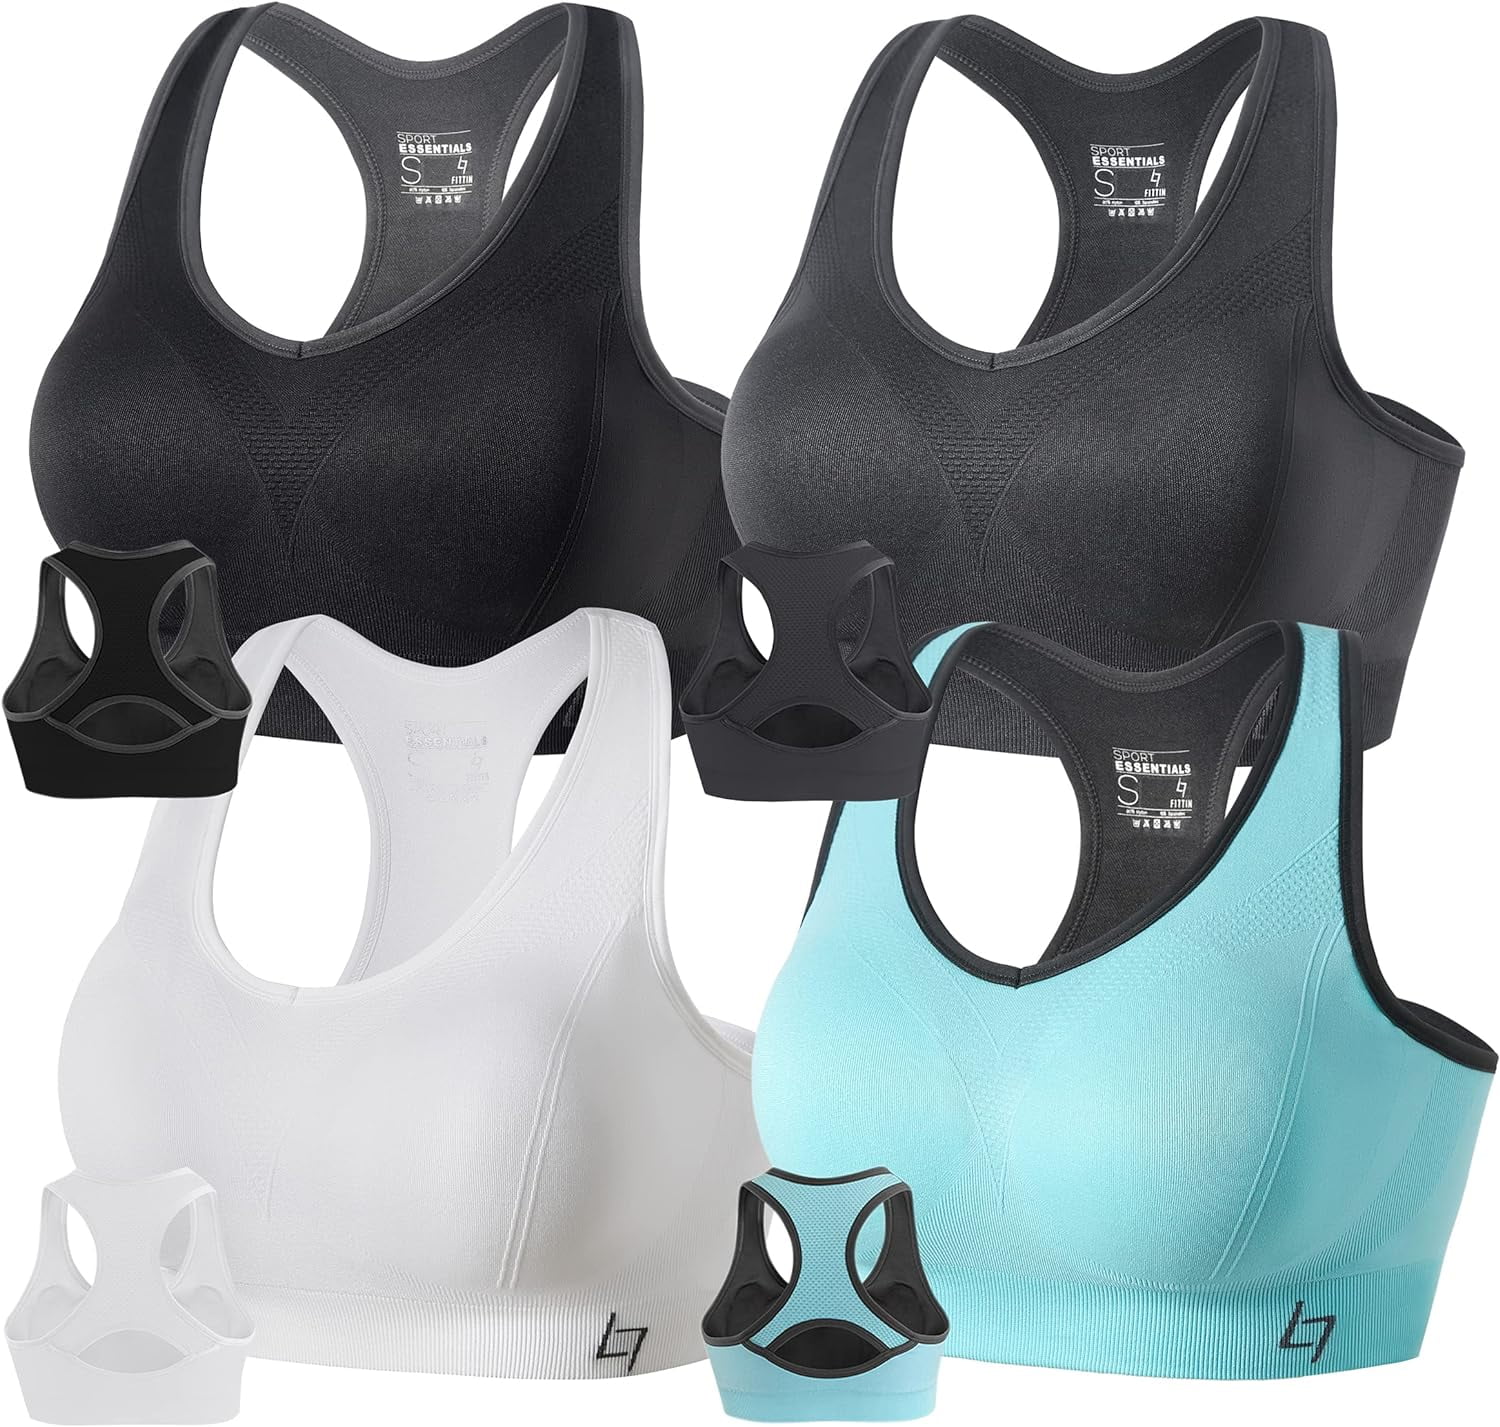 FITTIN Racerback Sports Bras for Women - Padded Seamless High Impact  Support for Yoga Gym Workout Fitness Large A1-black/Grey/Blue/White